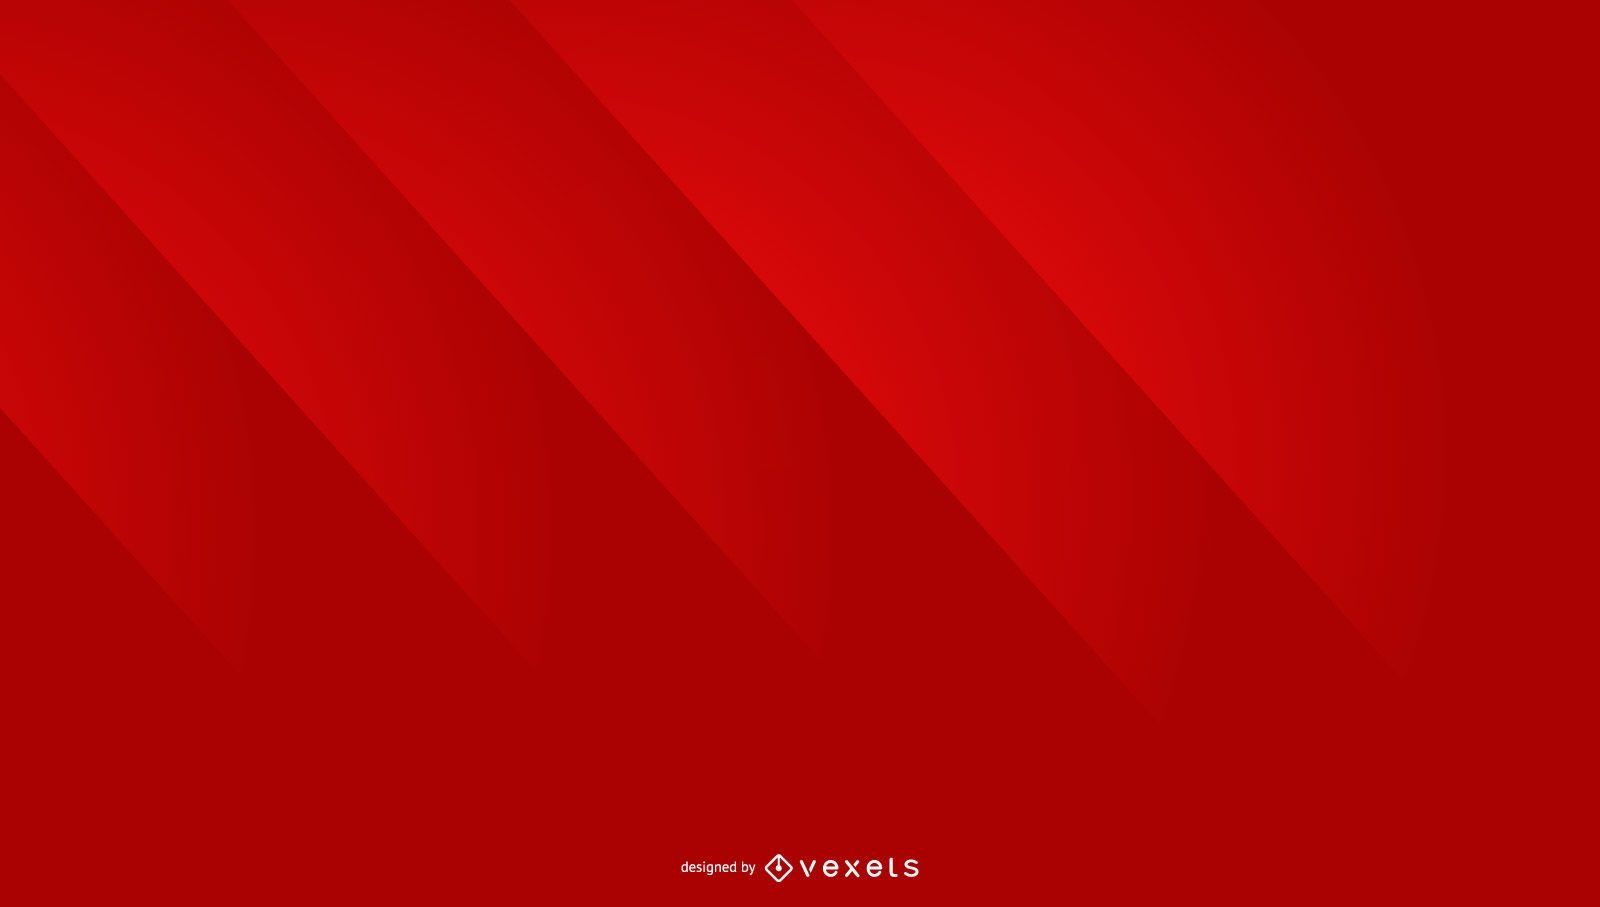 cool abstract wallpaper designs red